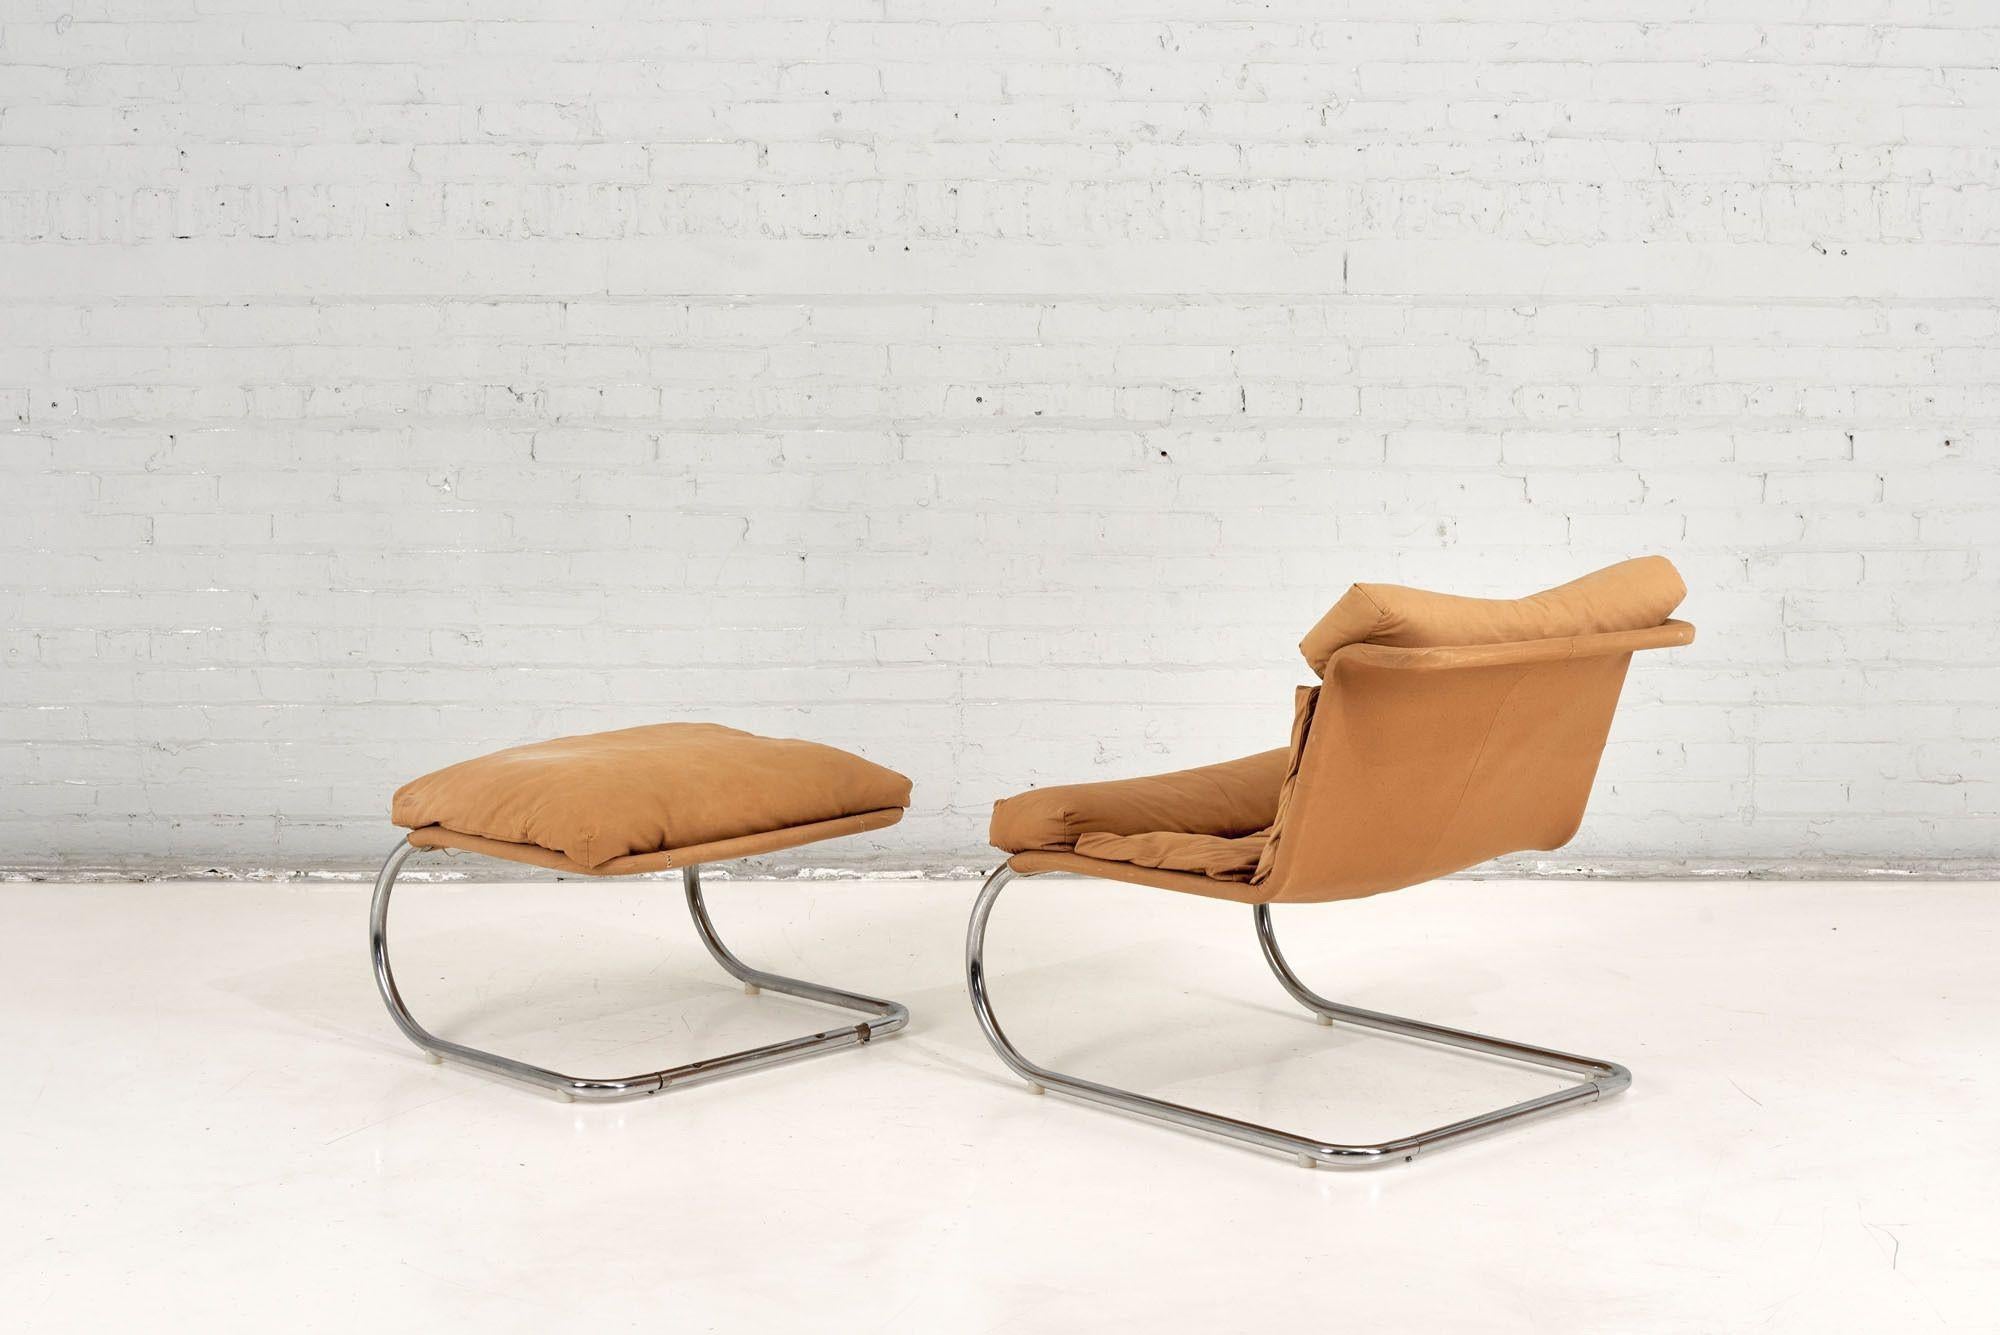 Mid-20th Century Stainless Steel & Canvas Cantilever MR Lounge Chair & Ottoman, 1960 For Sale